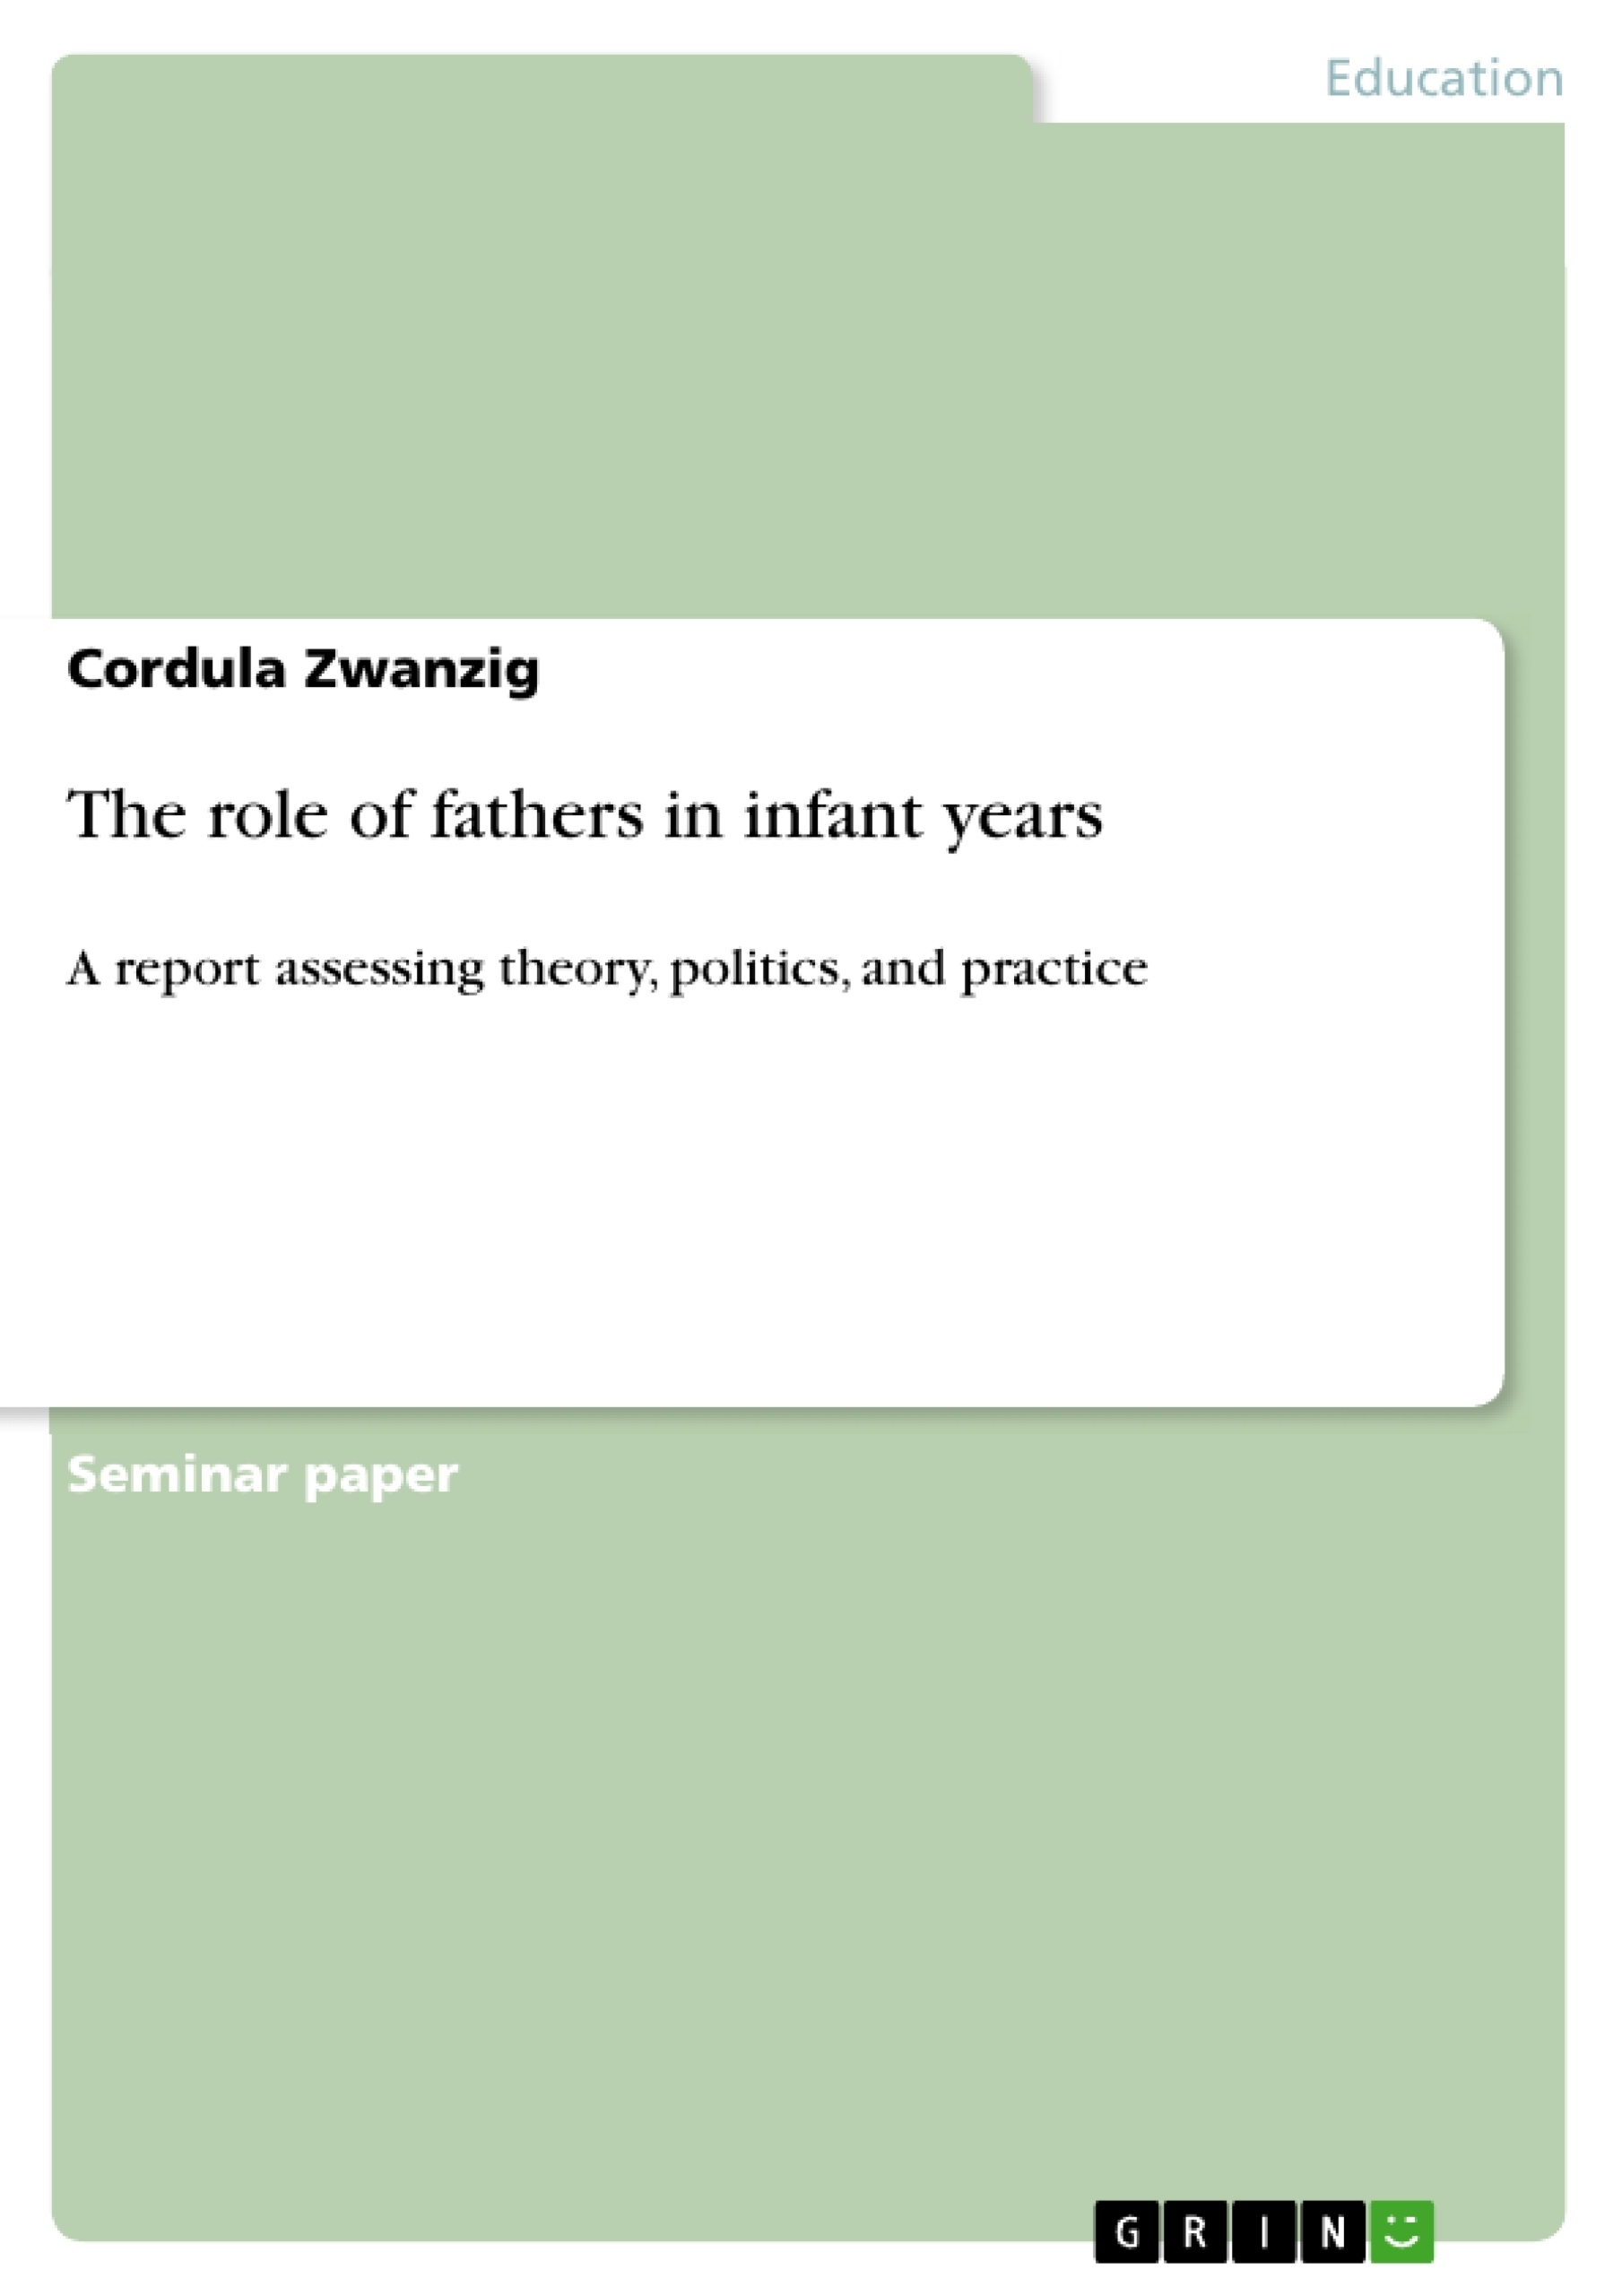 Title: The role of fathers in infant years